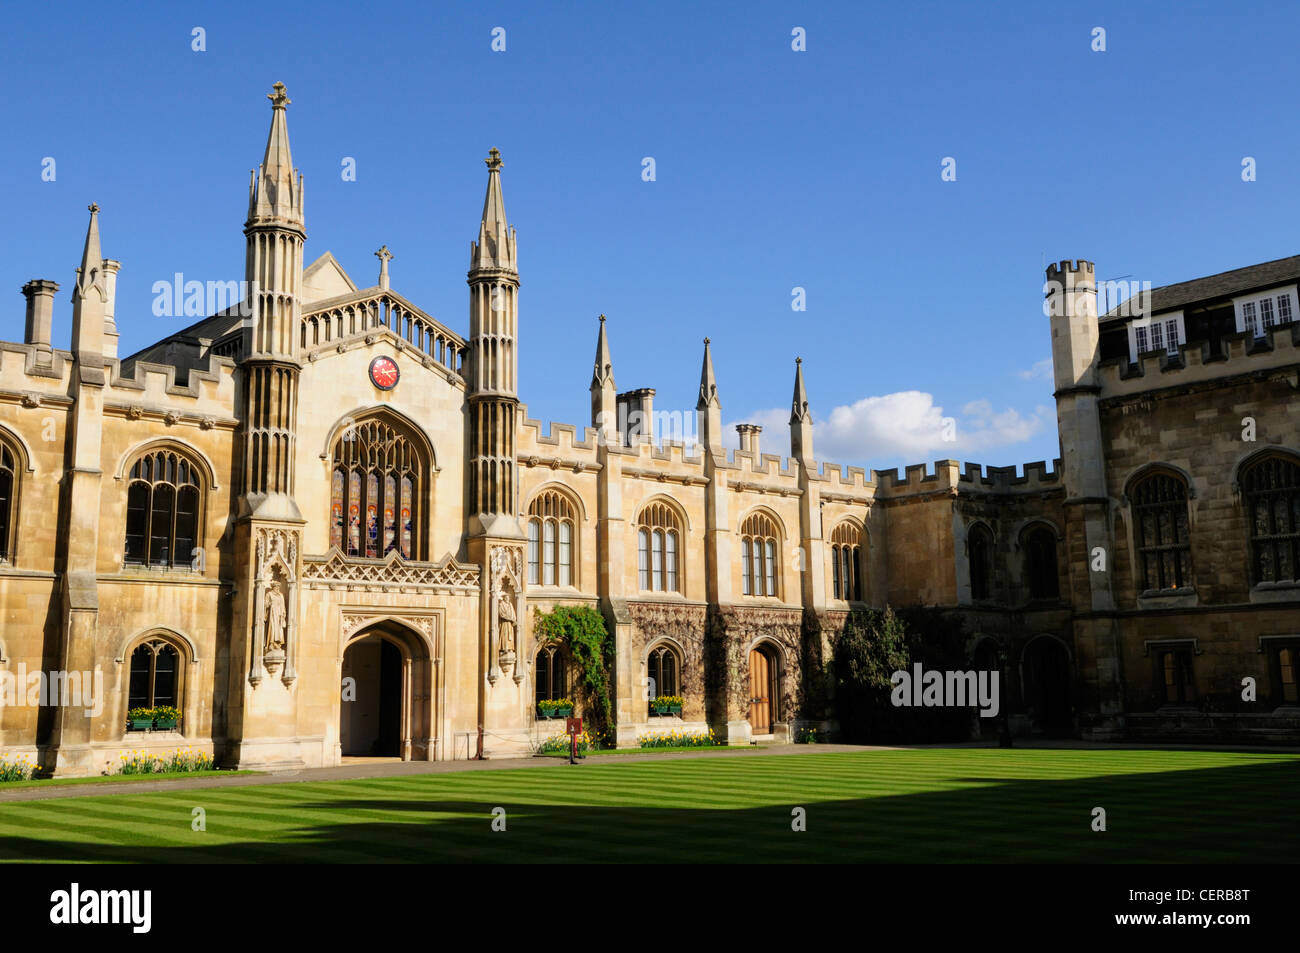 Corpus Christi College, one of the ancient colleges of the University of Cambridge. Stock Photo